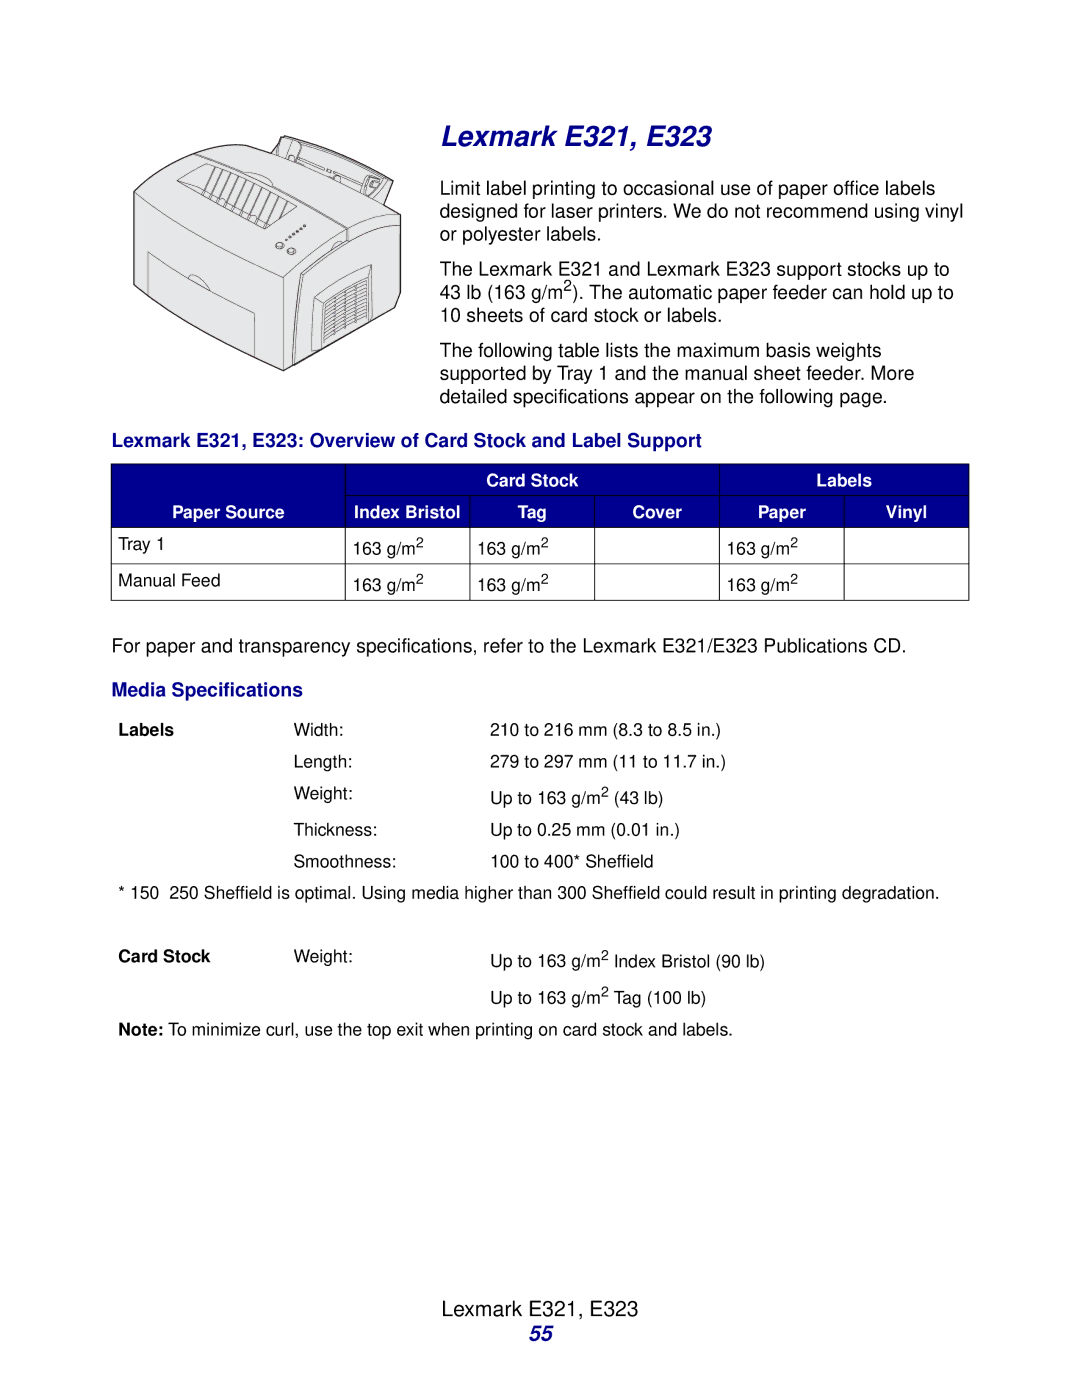 Lexmark Laser Printers manual Lexmark E321, E323 Overview of Card Stock and Label Support 